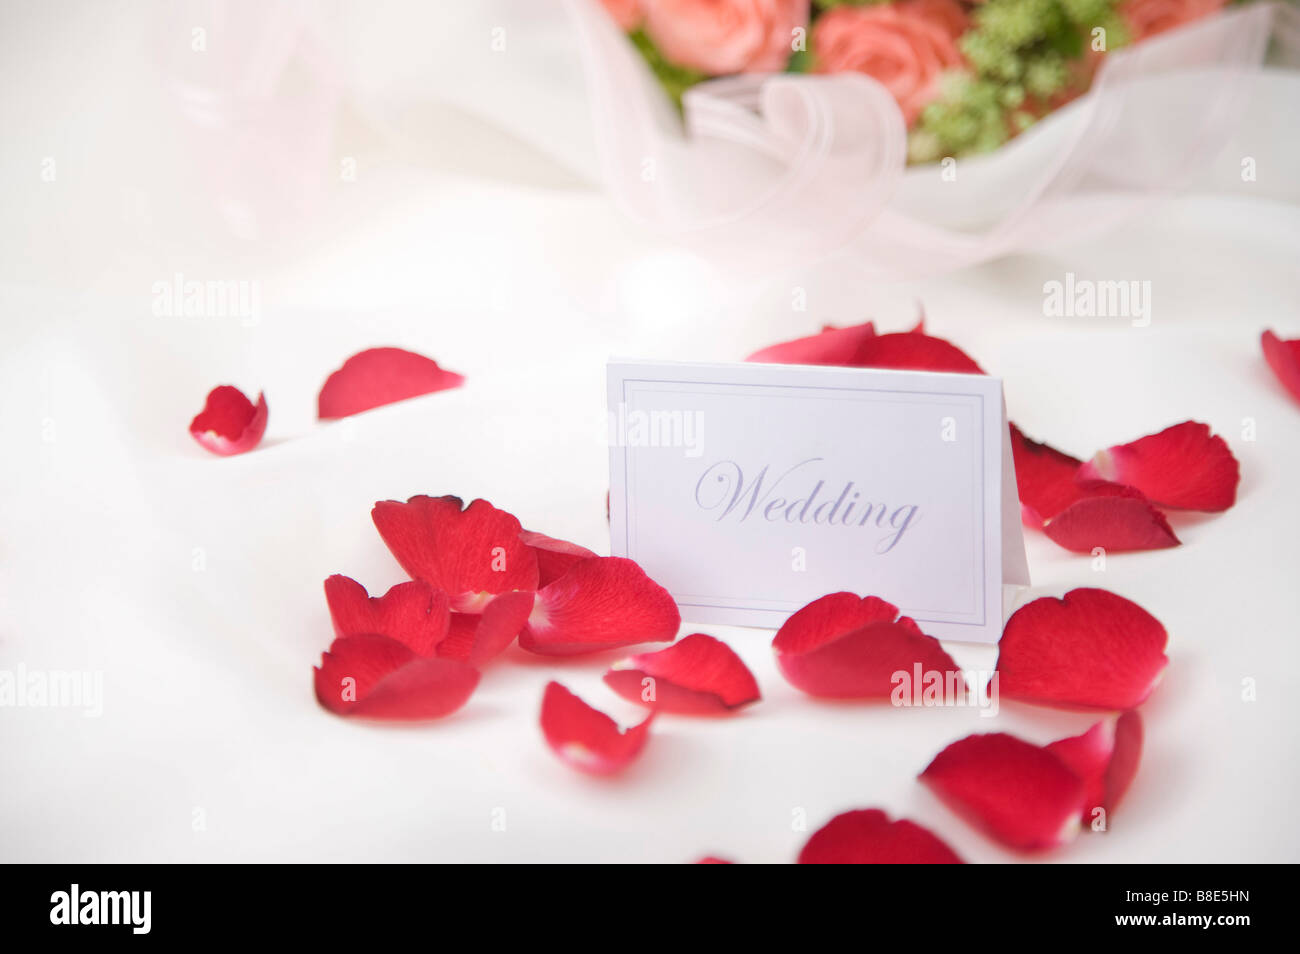 Rose Petals And Wedding Name Tag On Fabric Stock Photo 22439361